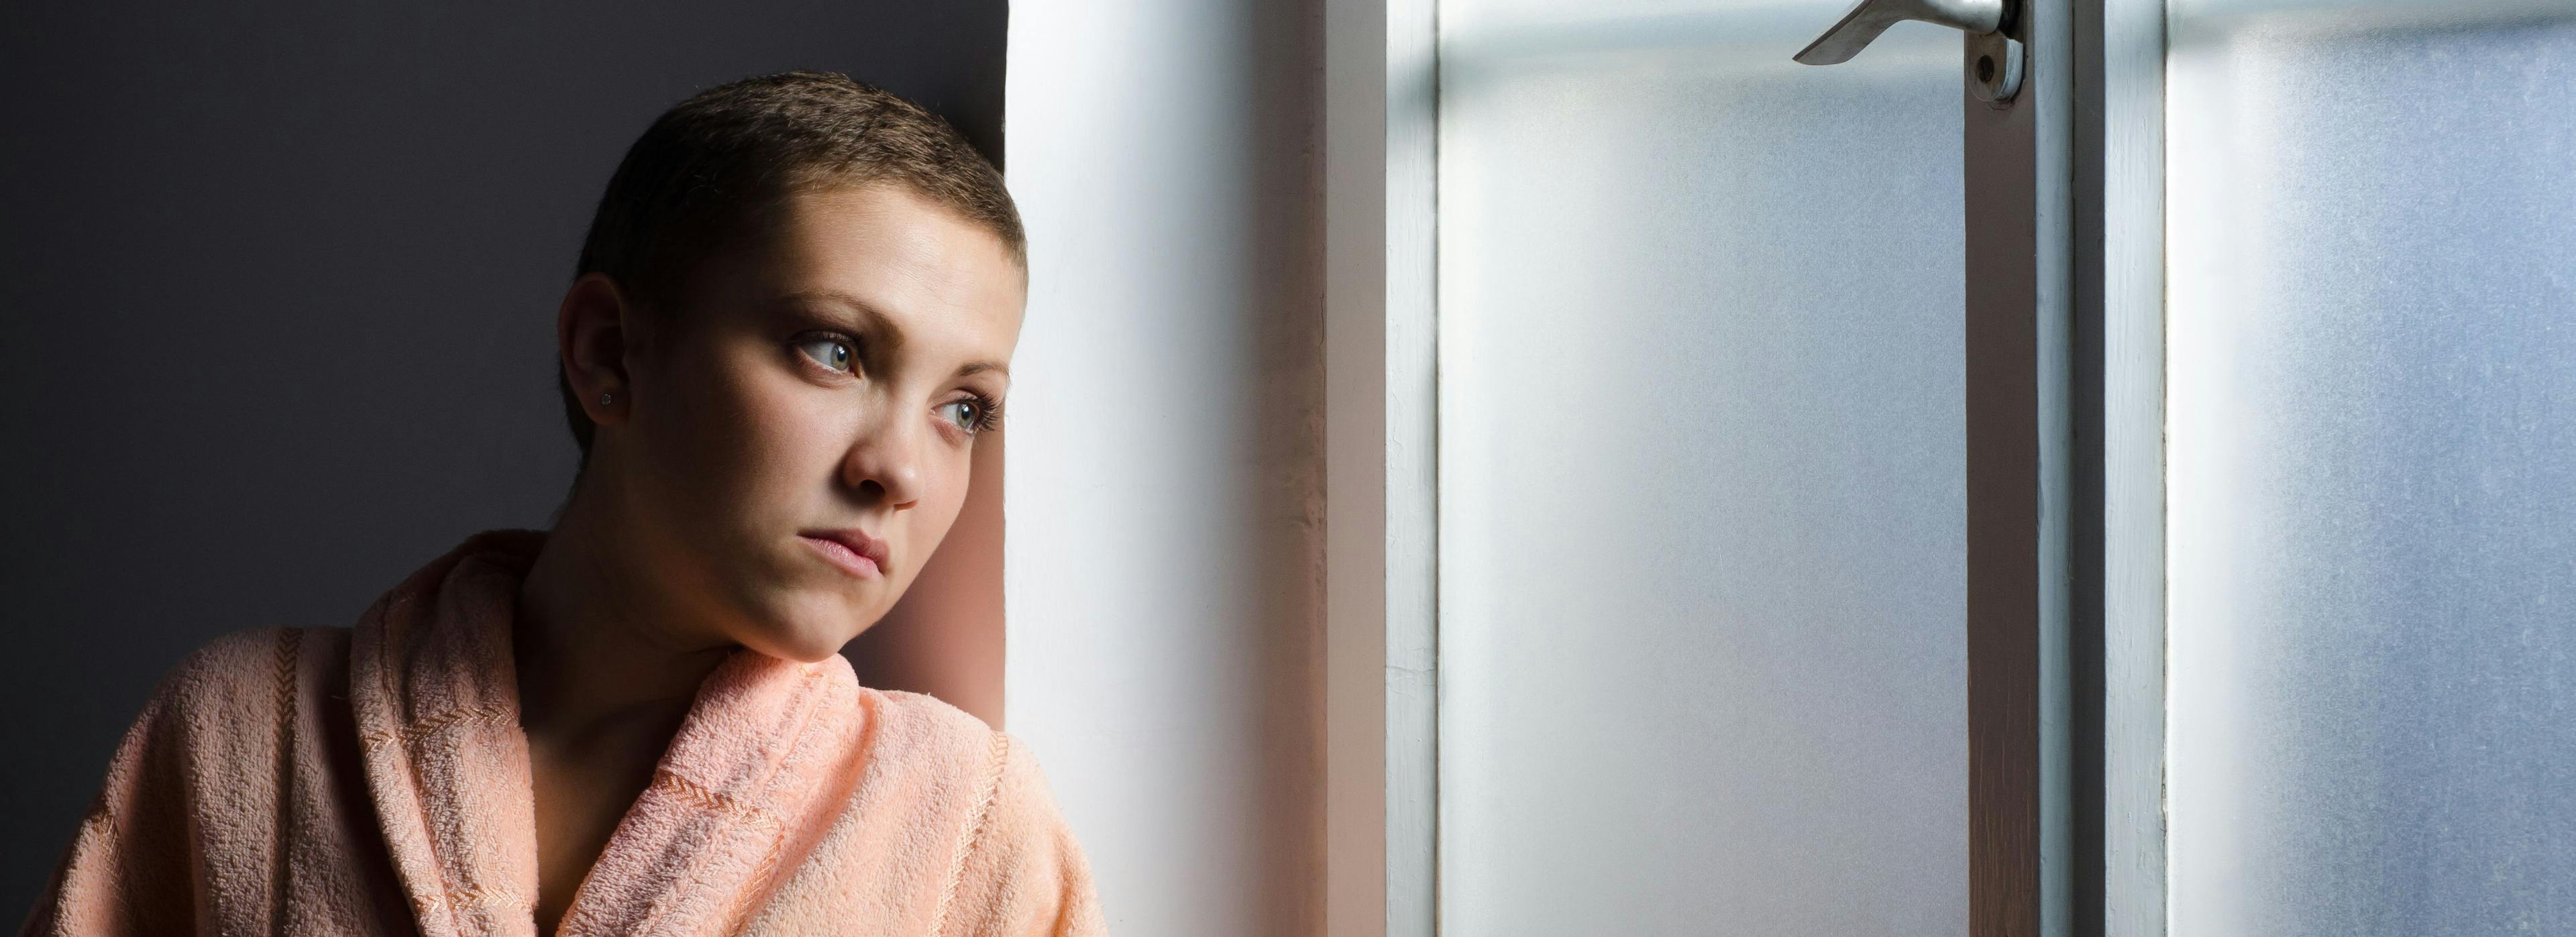 Young woman with cancer-related fatigue | Image Credit: Solid photos - stock.adobe.com